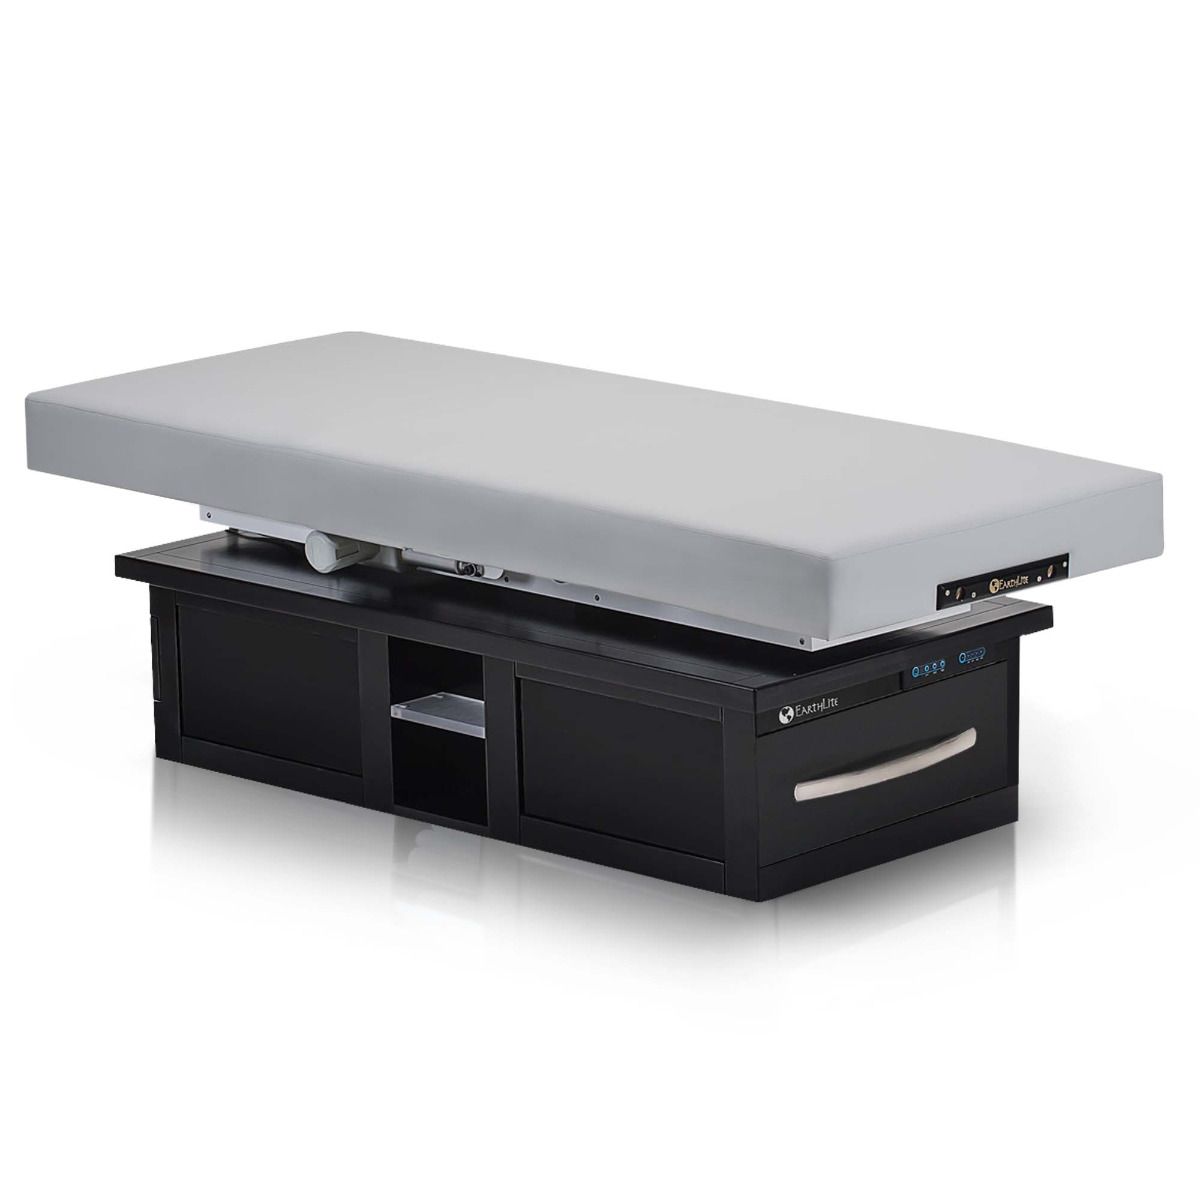 Earthlite Everest Eclipse™ Electric Lift Table